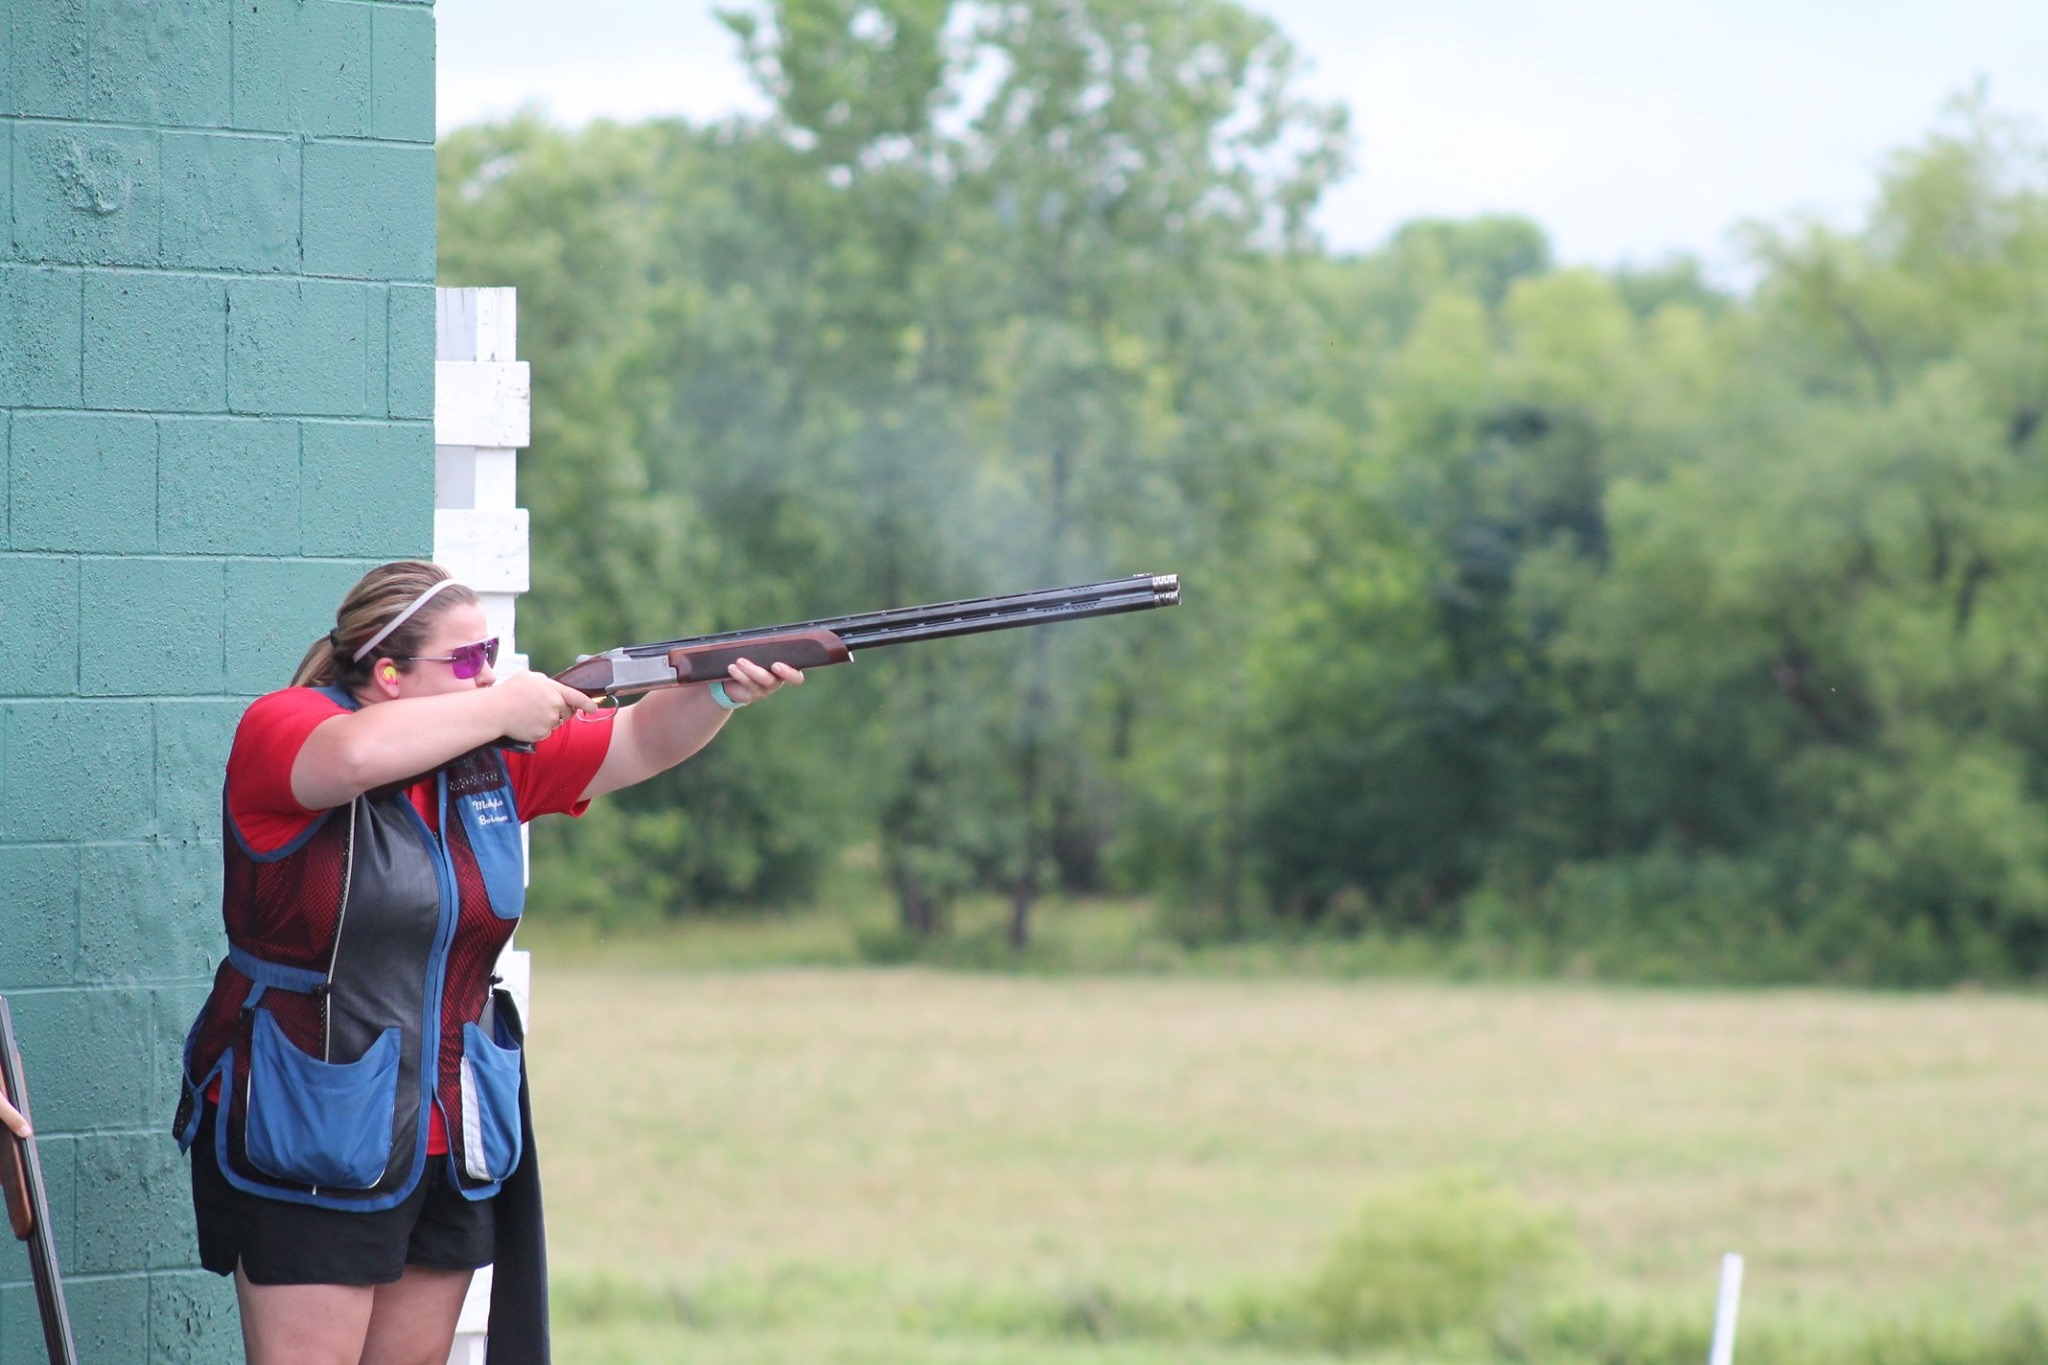 Makayla Boisseau competes at clay target shooting competition